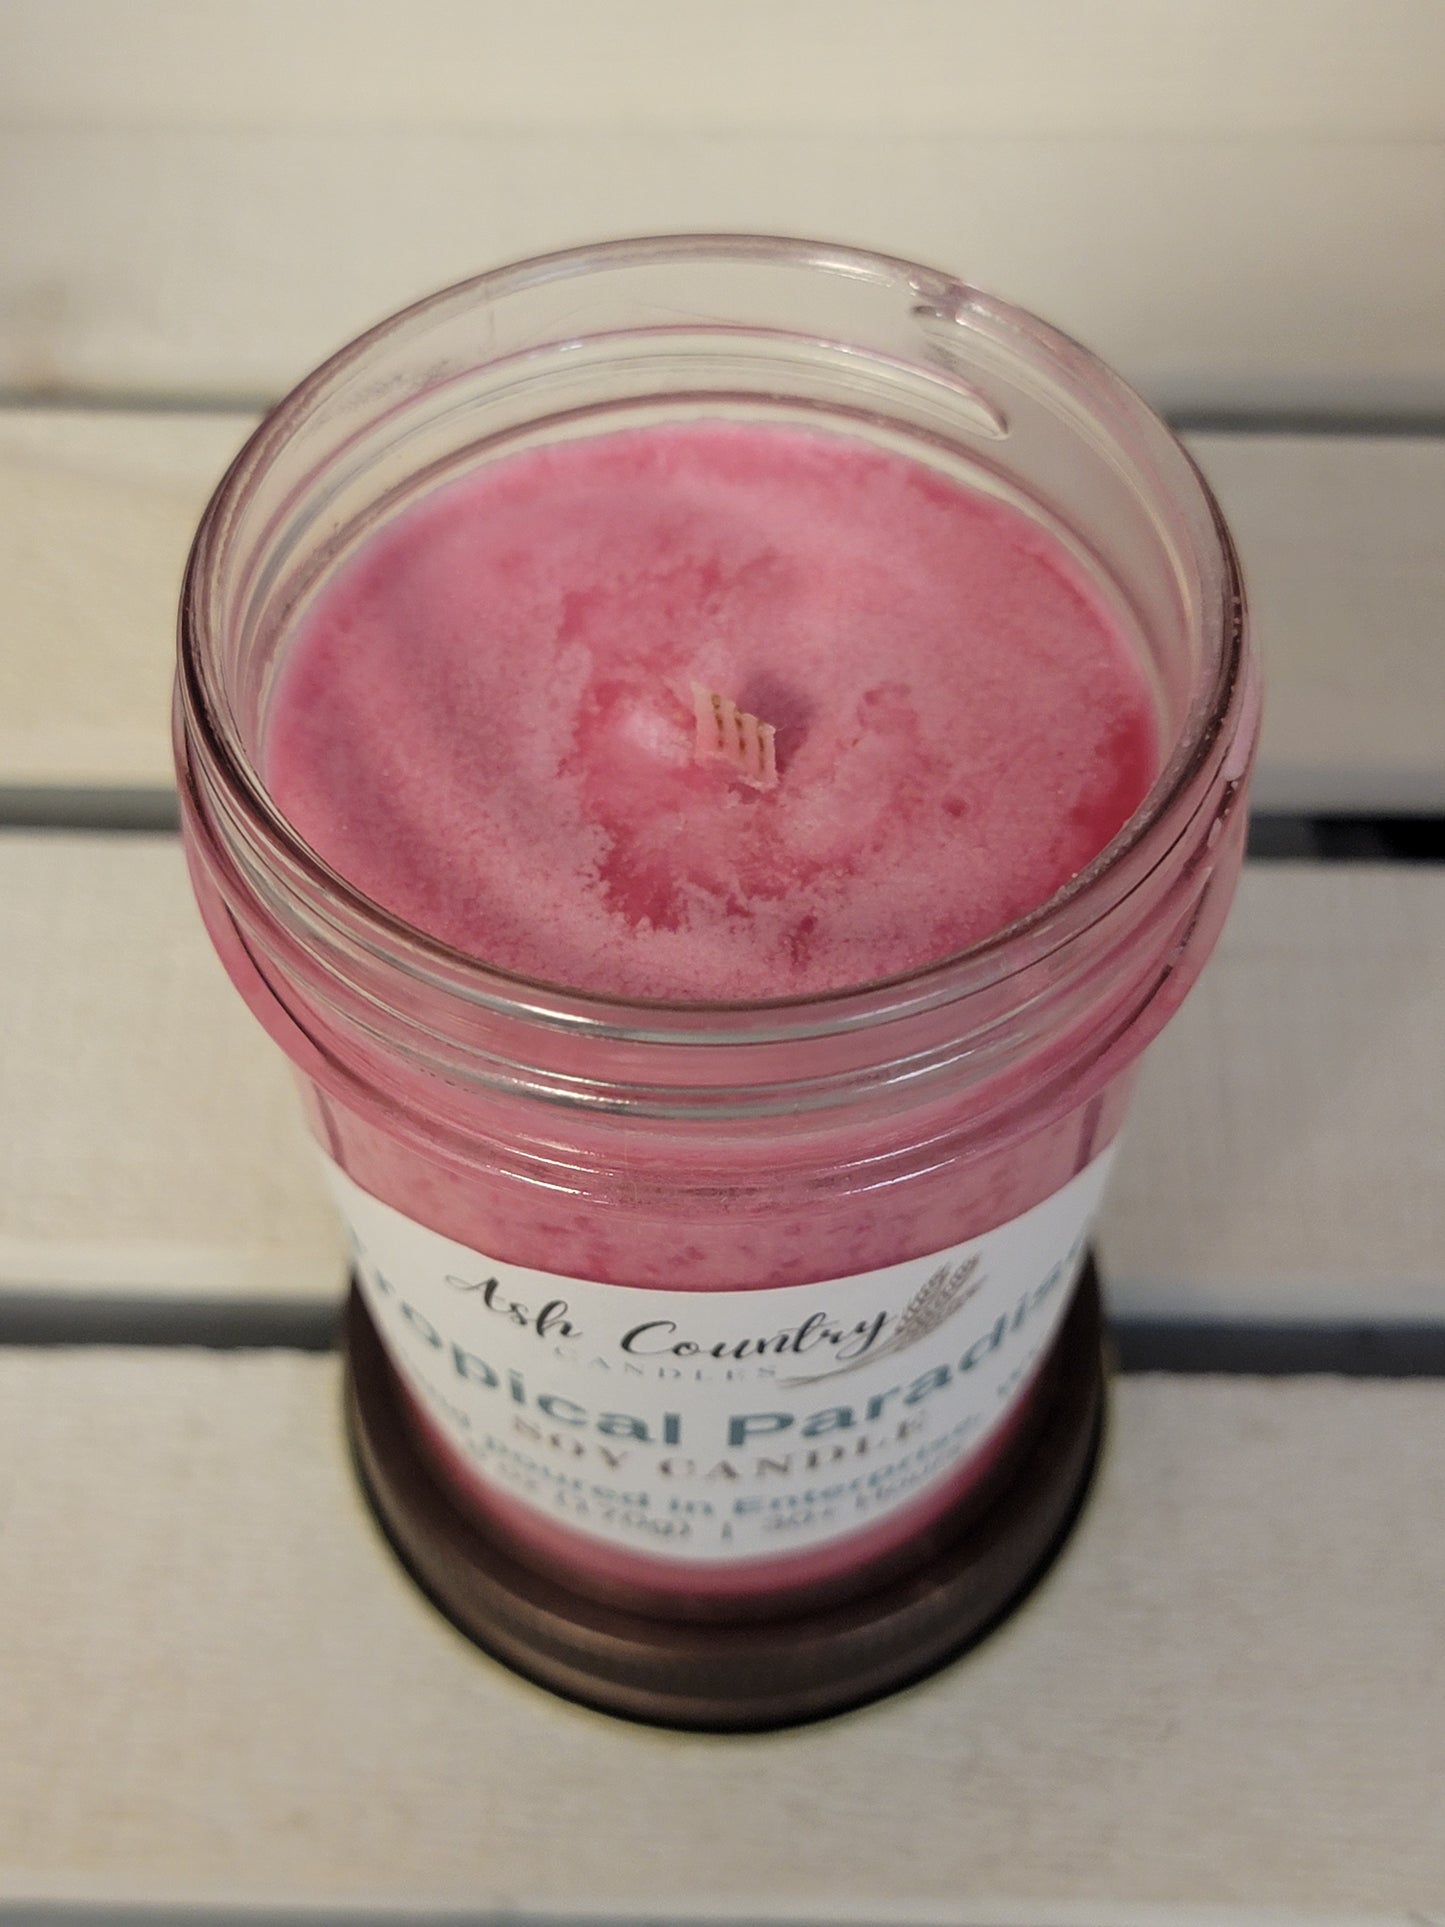 Tropical Paradise Candle